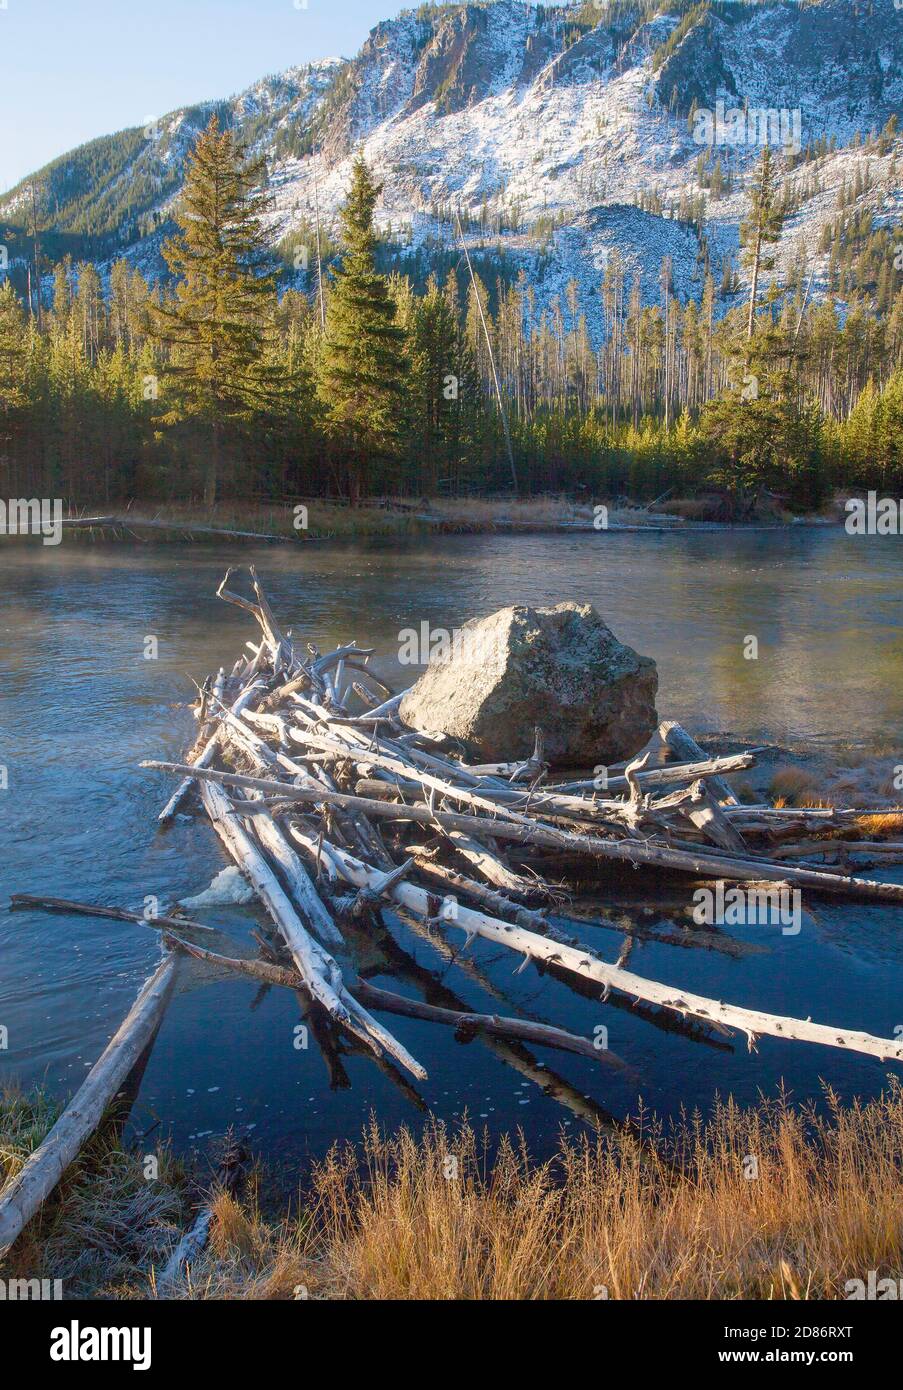 Boulder in Madison River, Yellowstone Park, US., fall, 2020. Stock Photo